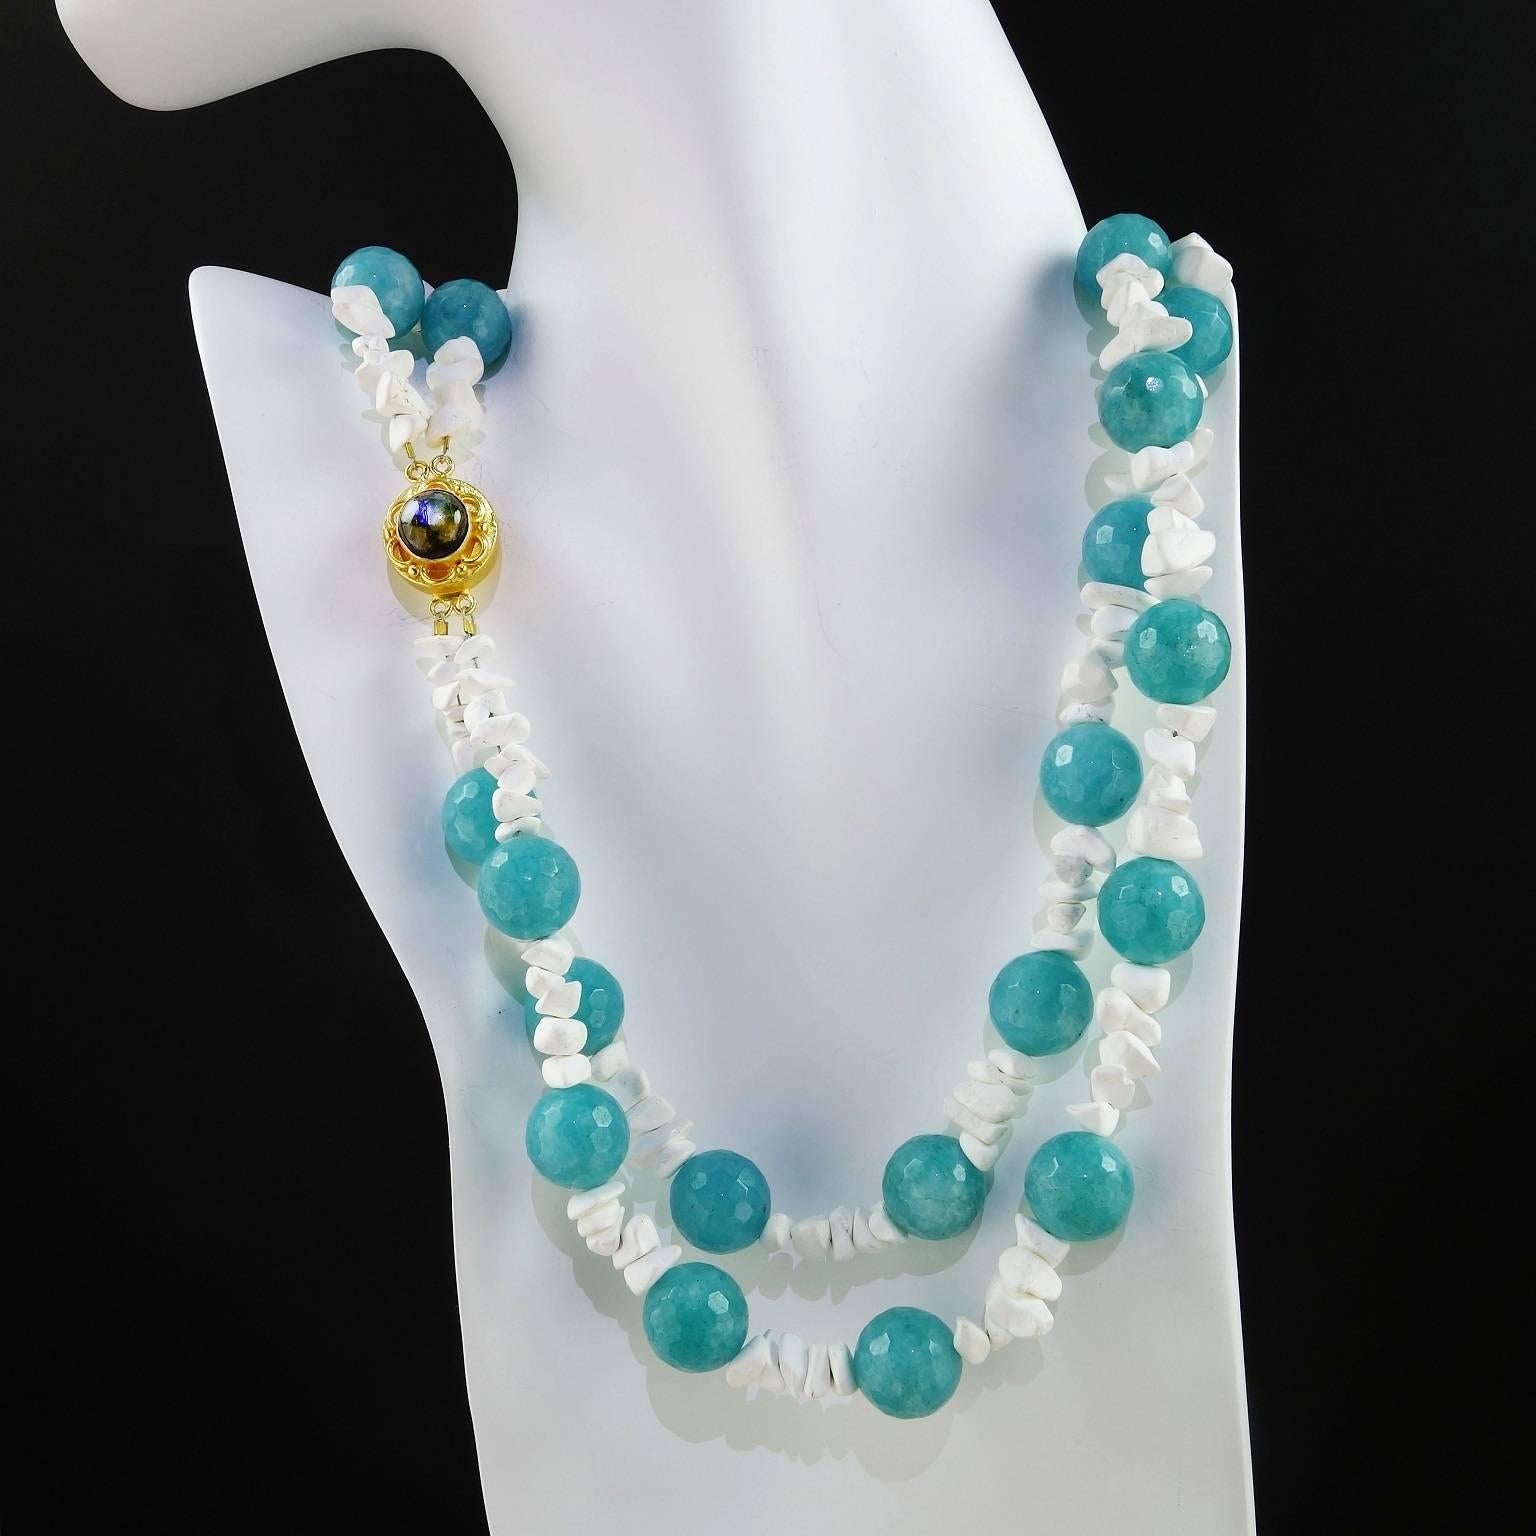 Double strand necklace of Blue dyed faceted agate balls and chips of white magnesite.  The agate is medium blue leaning towards teal and the Gold tone clasp features a labradorite cabochon.  The necklace is a comfortable 19 inch length and you can